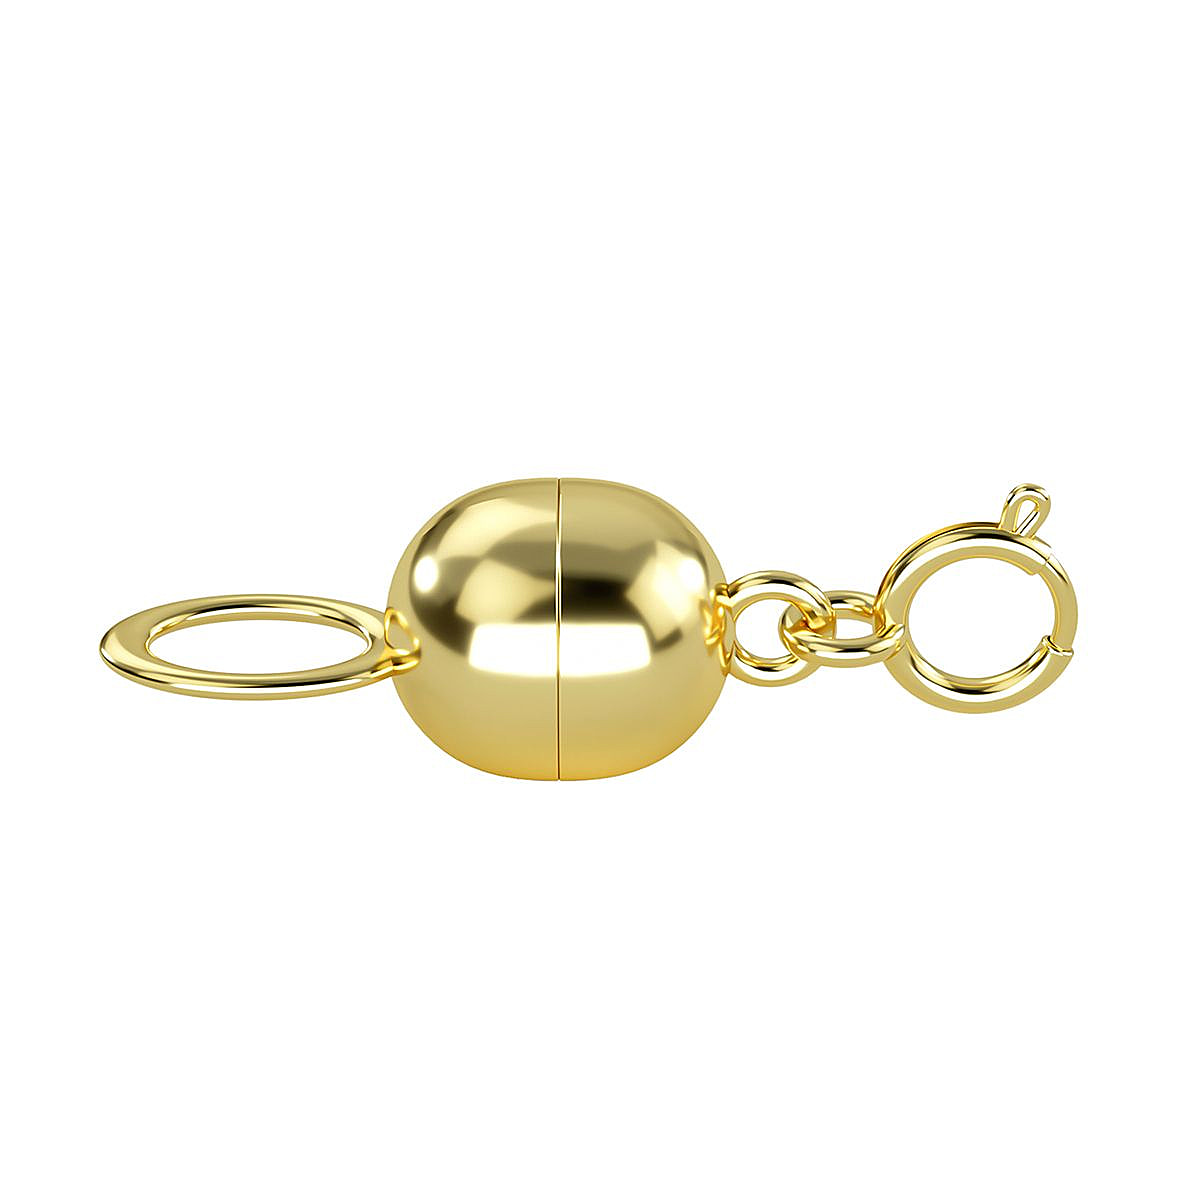 Magnetic Lock Clasp in 9K Yellow Gold 3531578